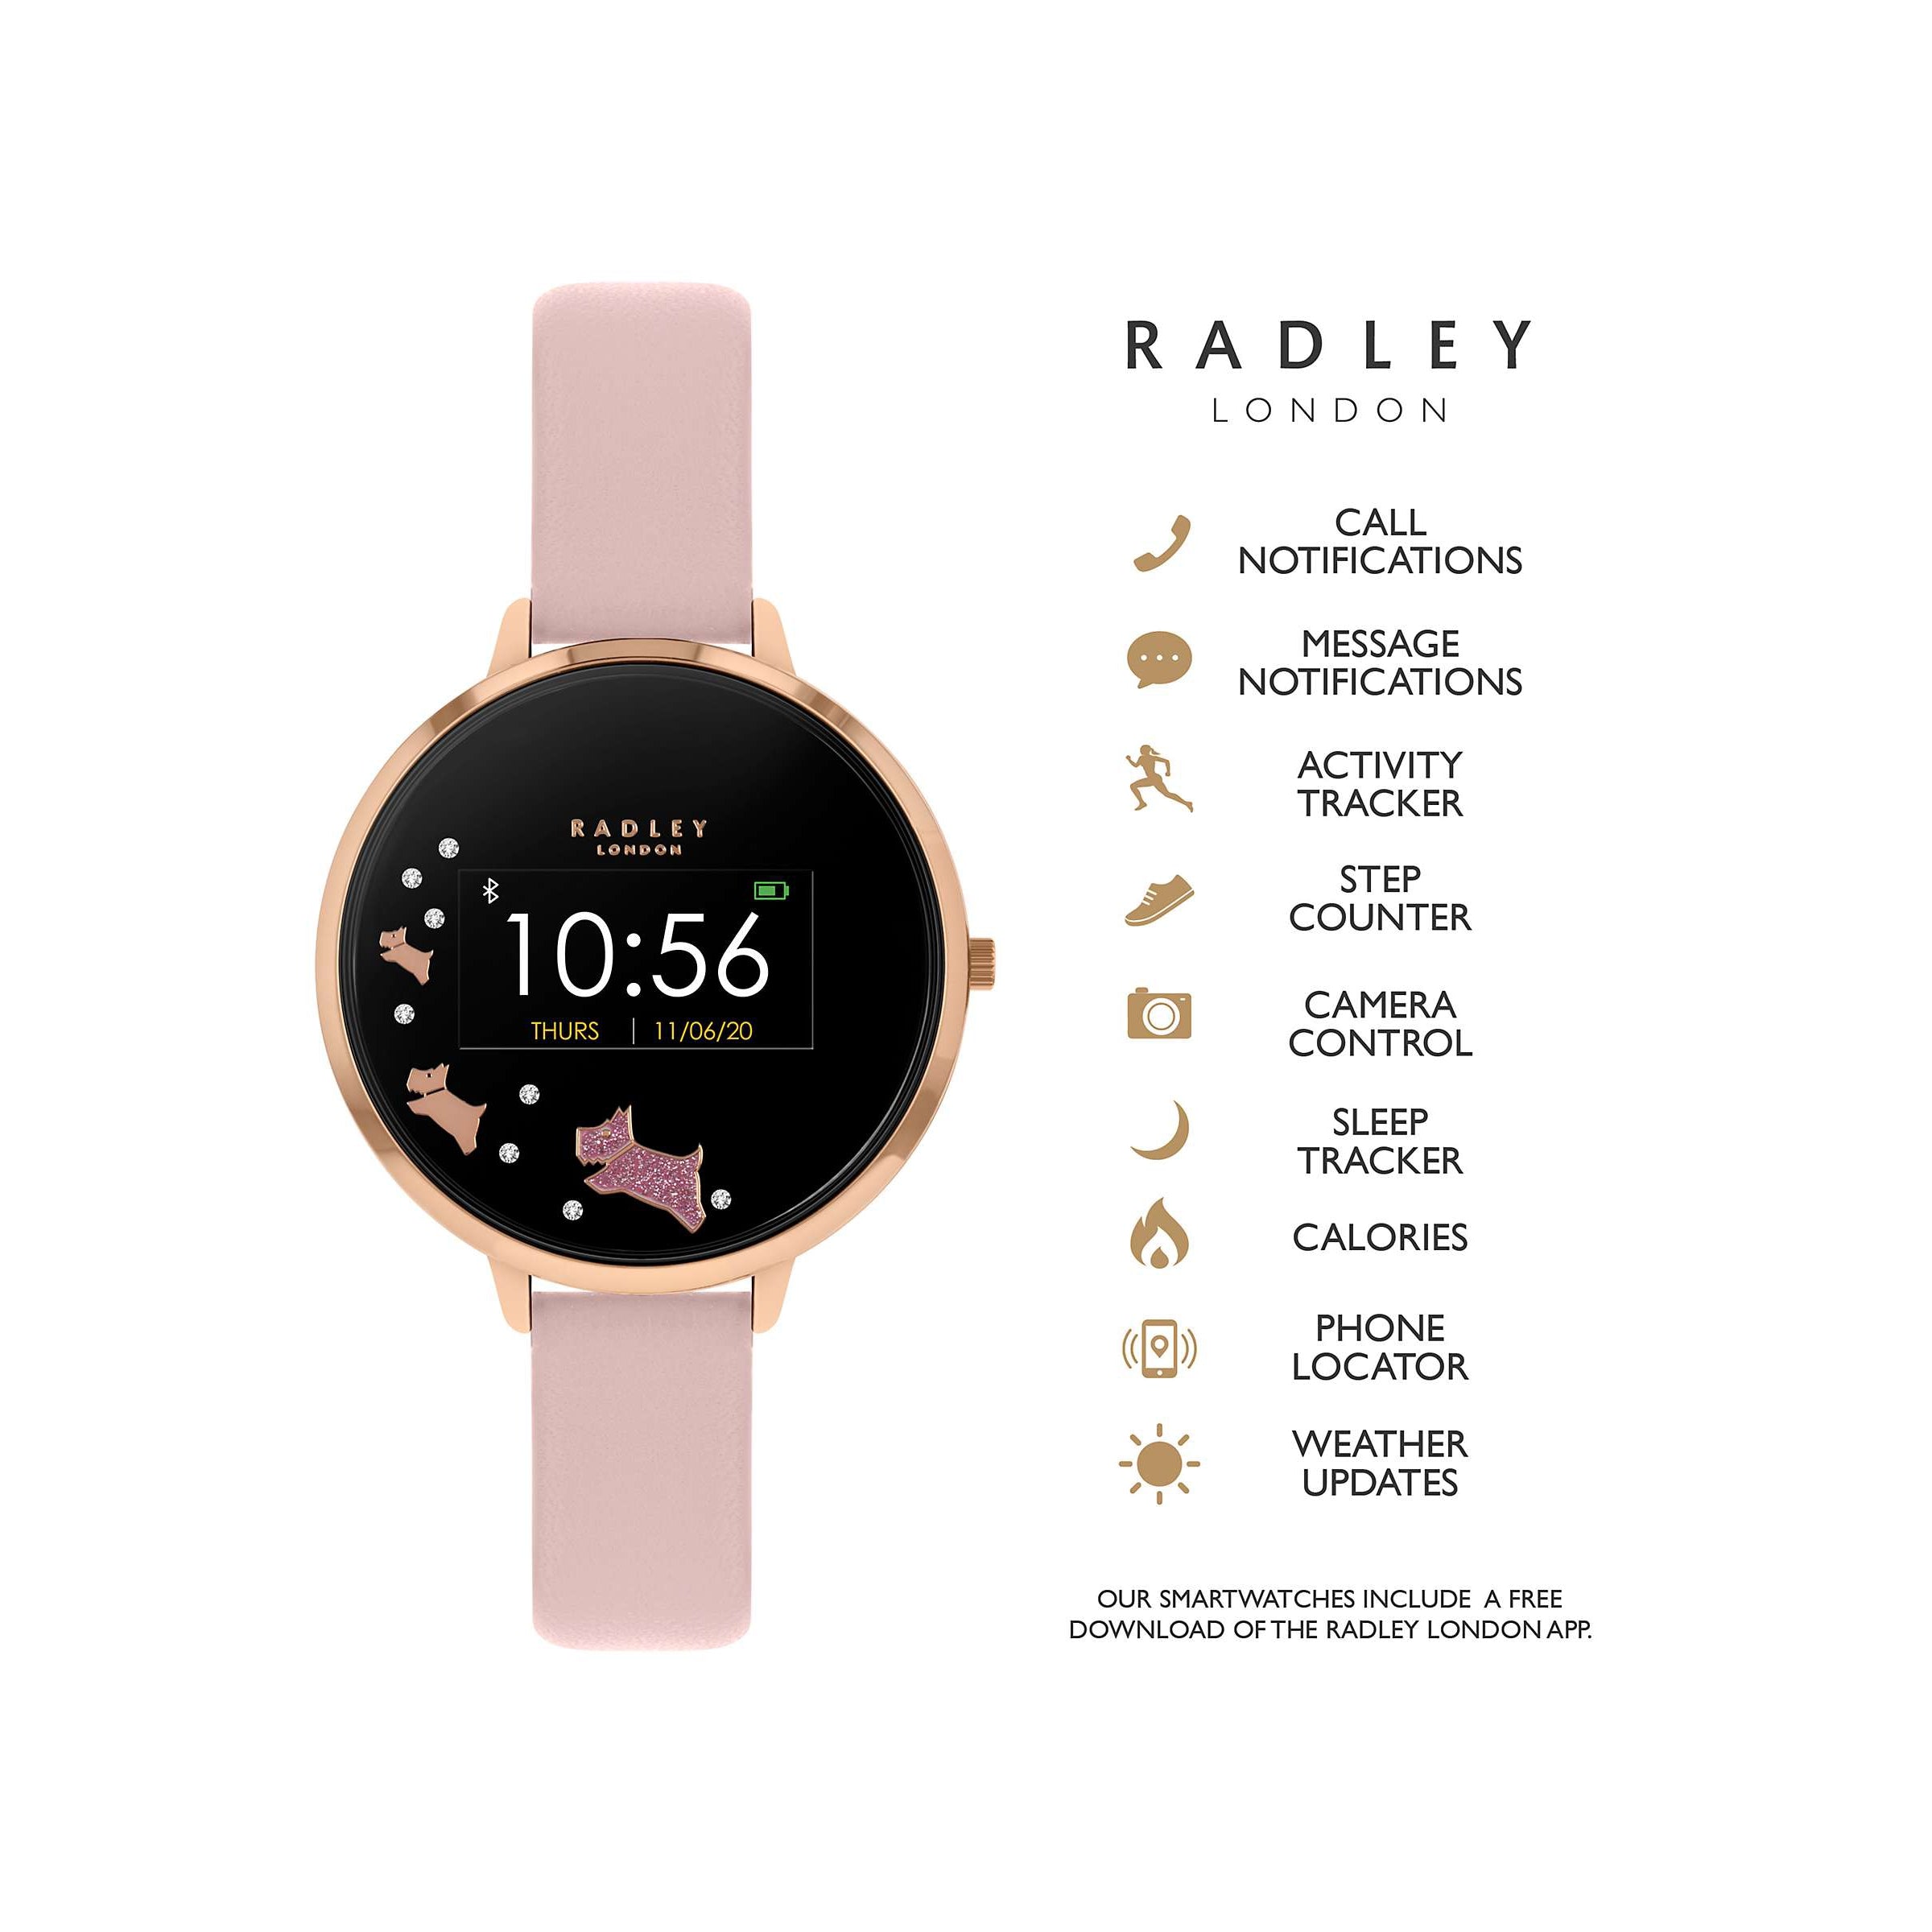 Radley Women's Leather Strap Series 3 Smartwatch, Gold & Pink (RYS03-2002) - Good Condition